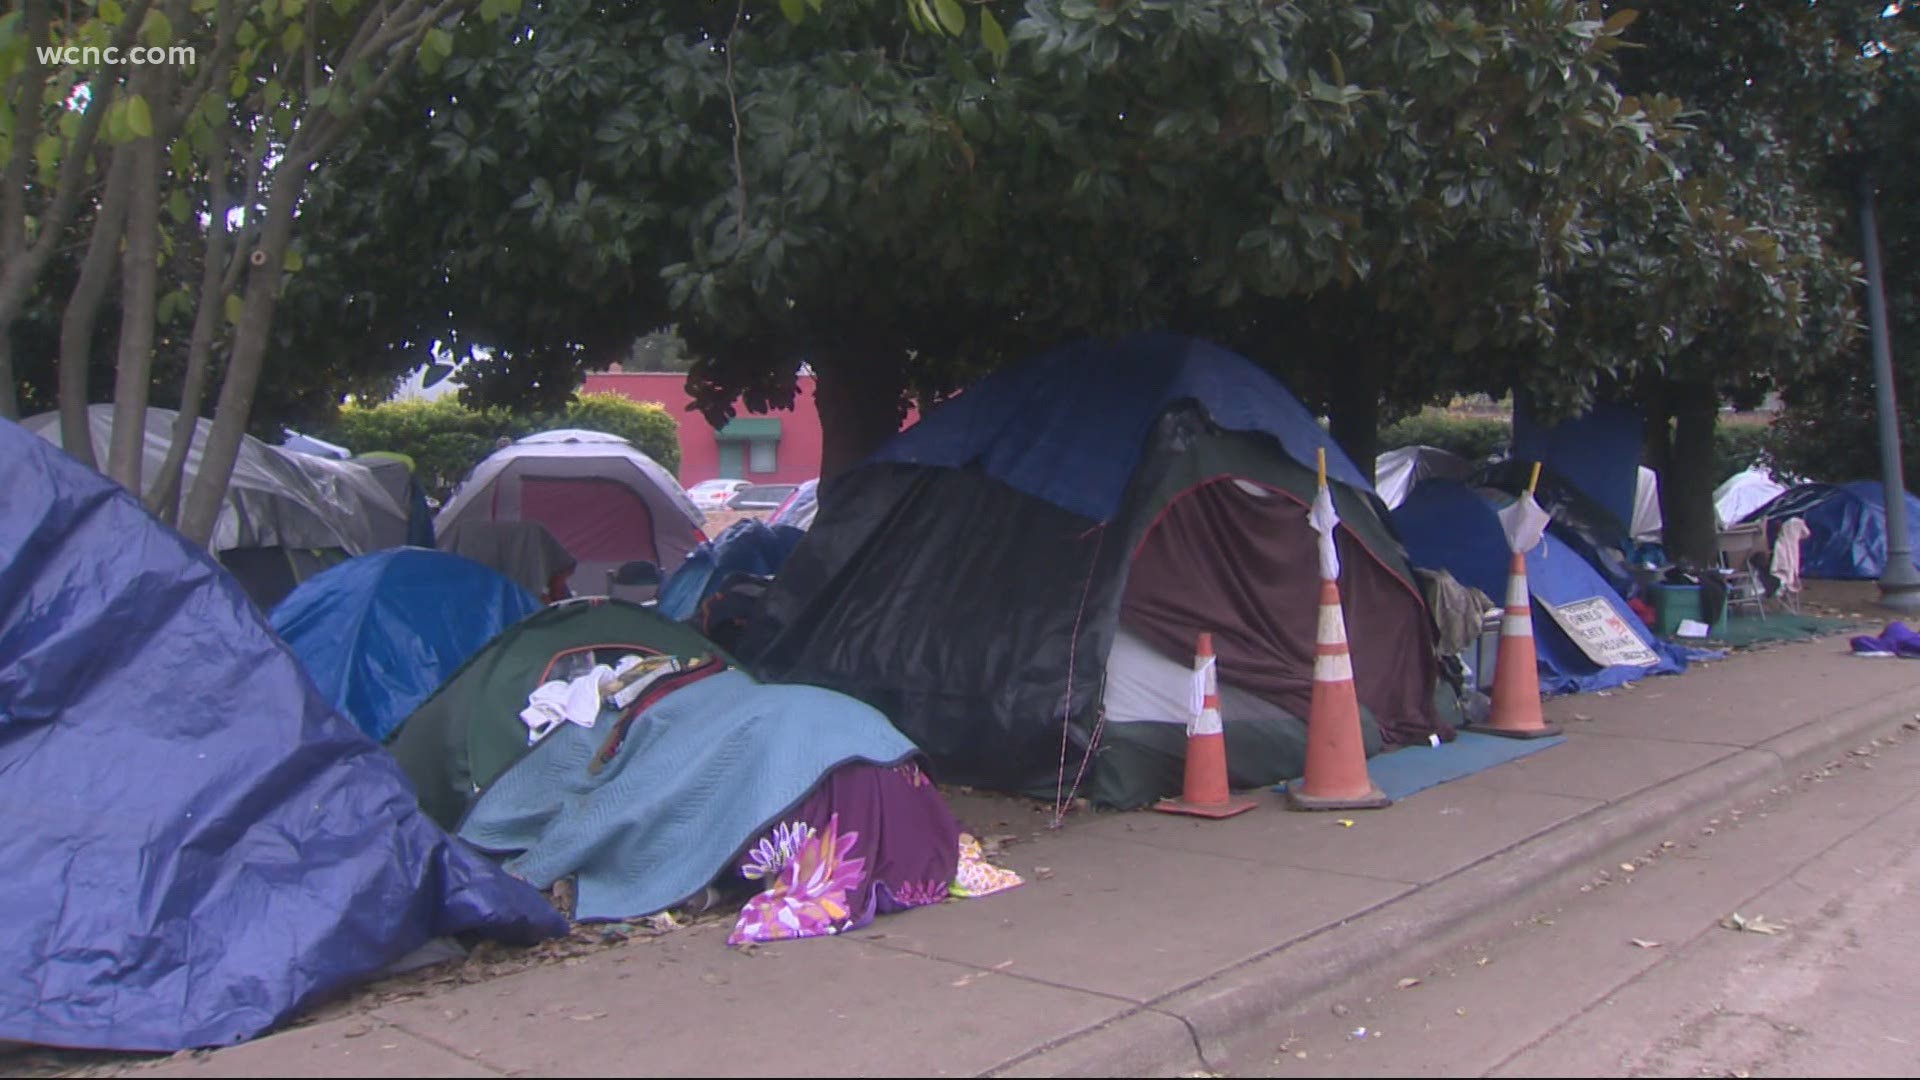 The people living in these tents need some supplies, and there are organizations helping them this holiday season.